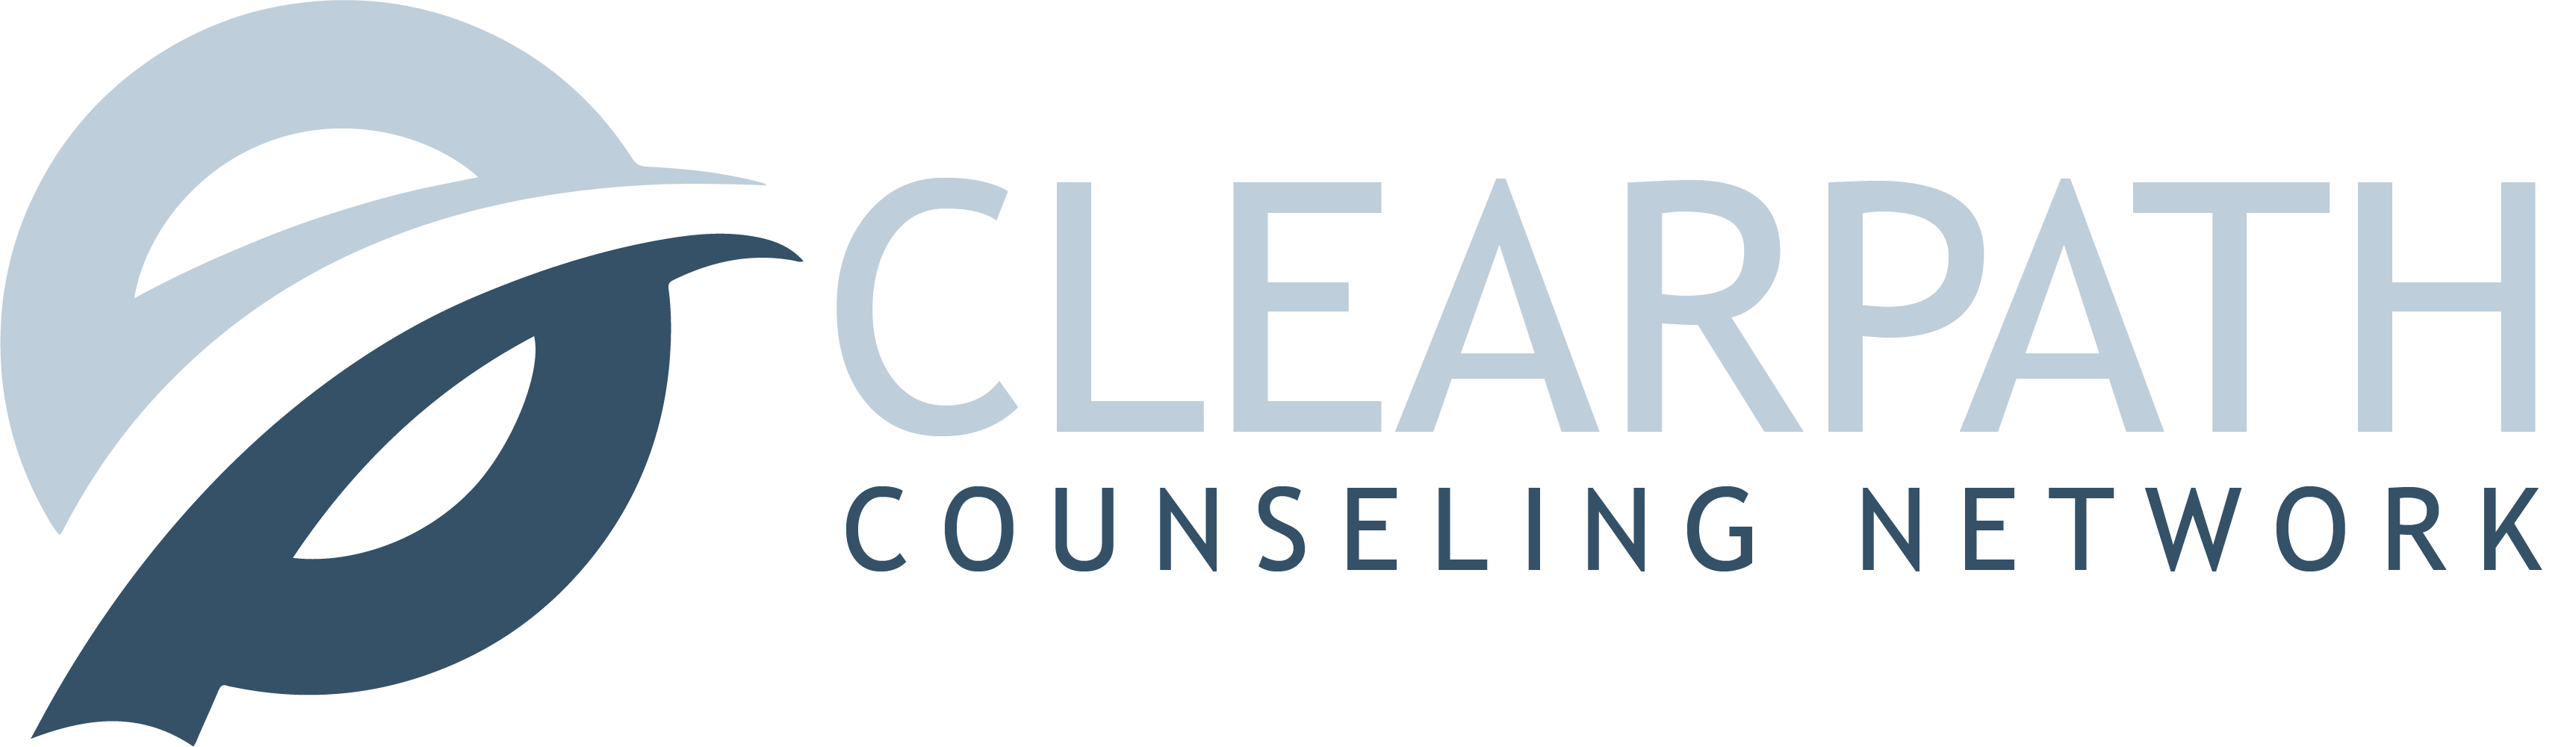 Clear Path Counseling Network